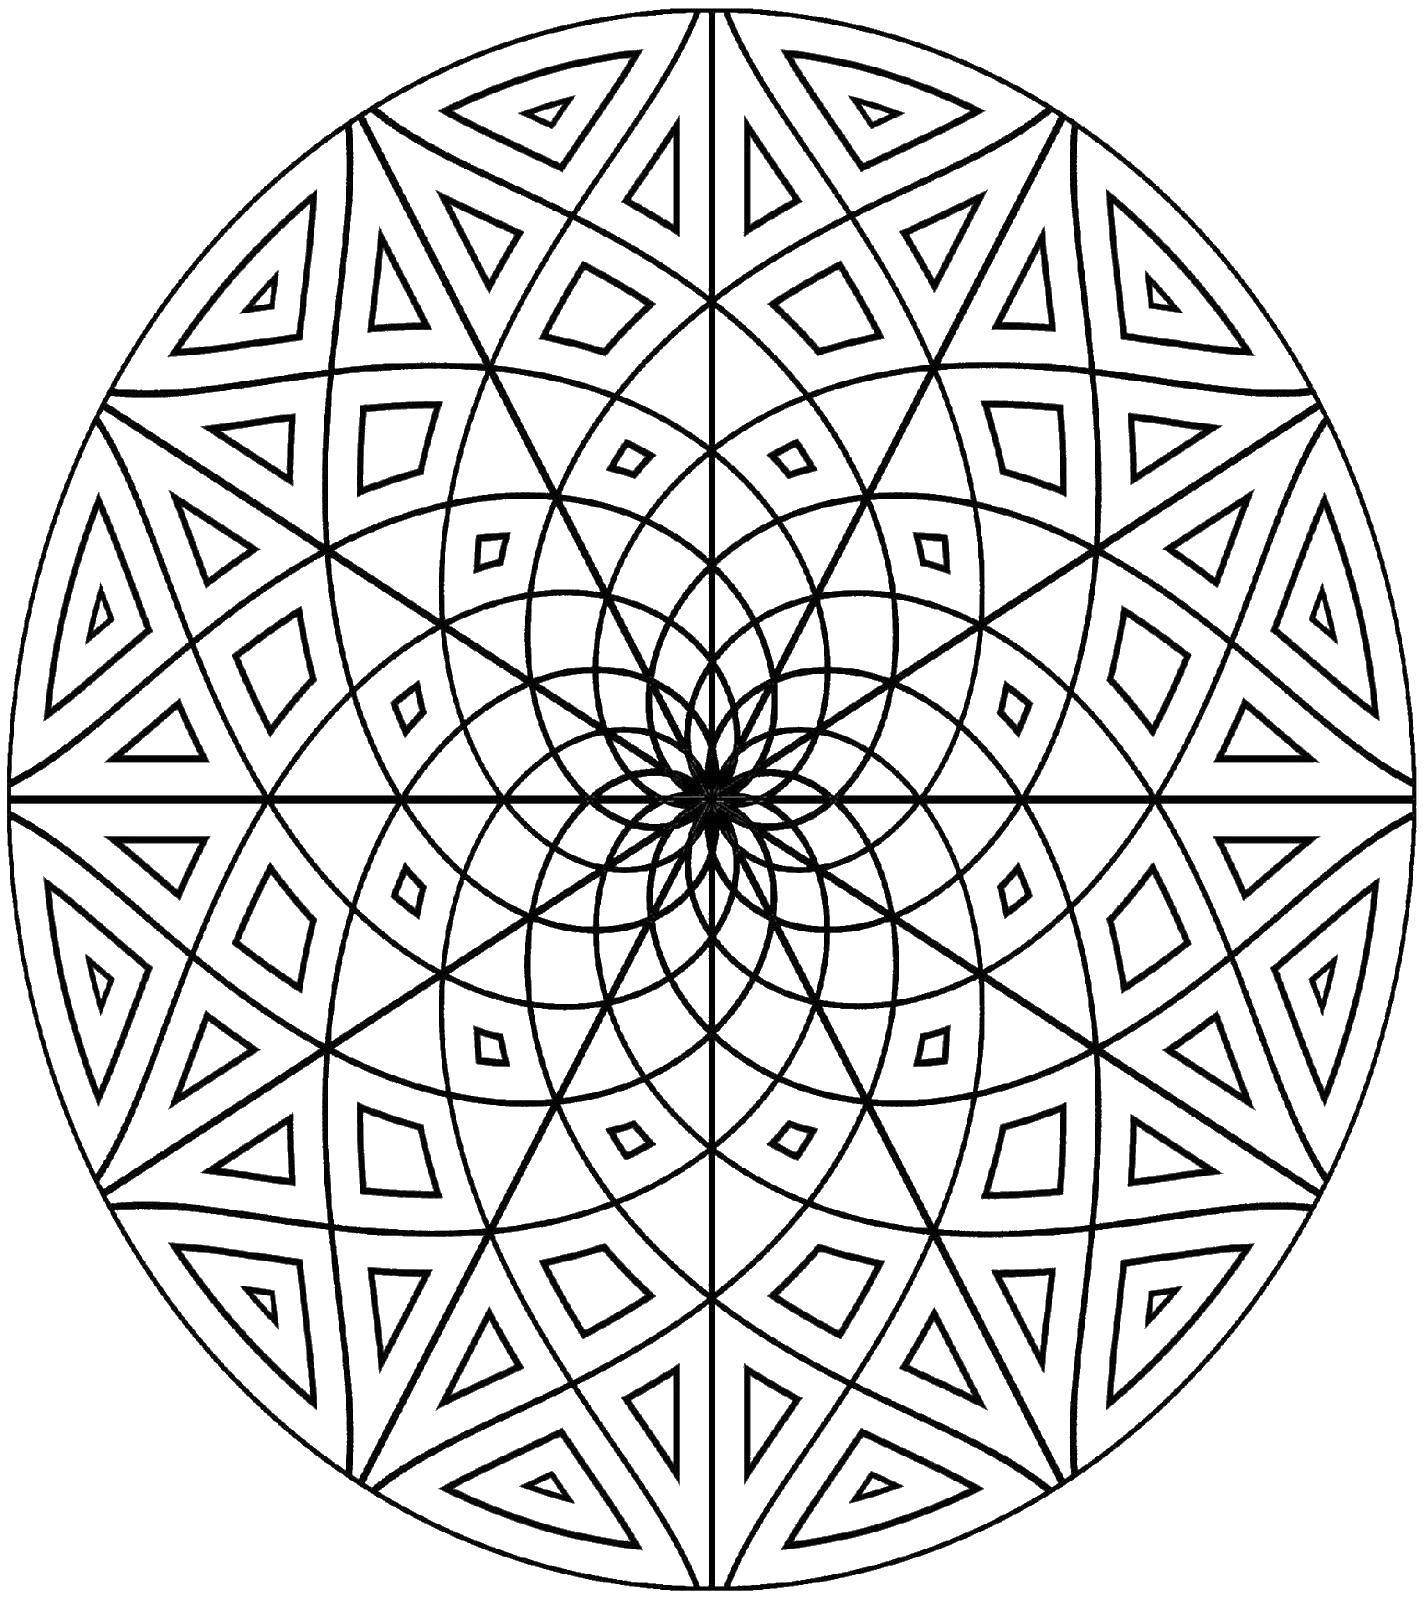 Coloring Geometric patterns in the round. Category Patterns. Tags:  patterns, circle, shapes.